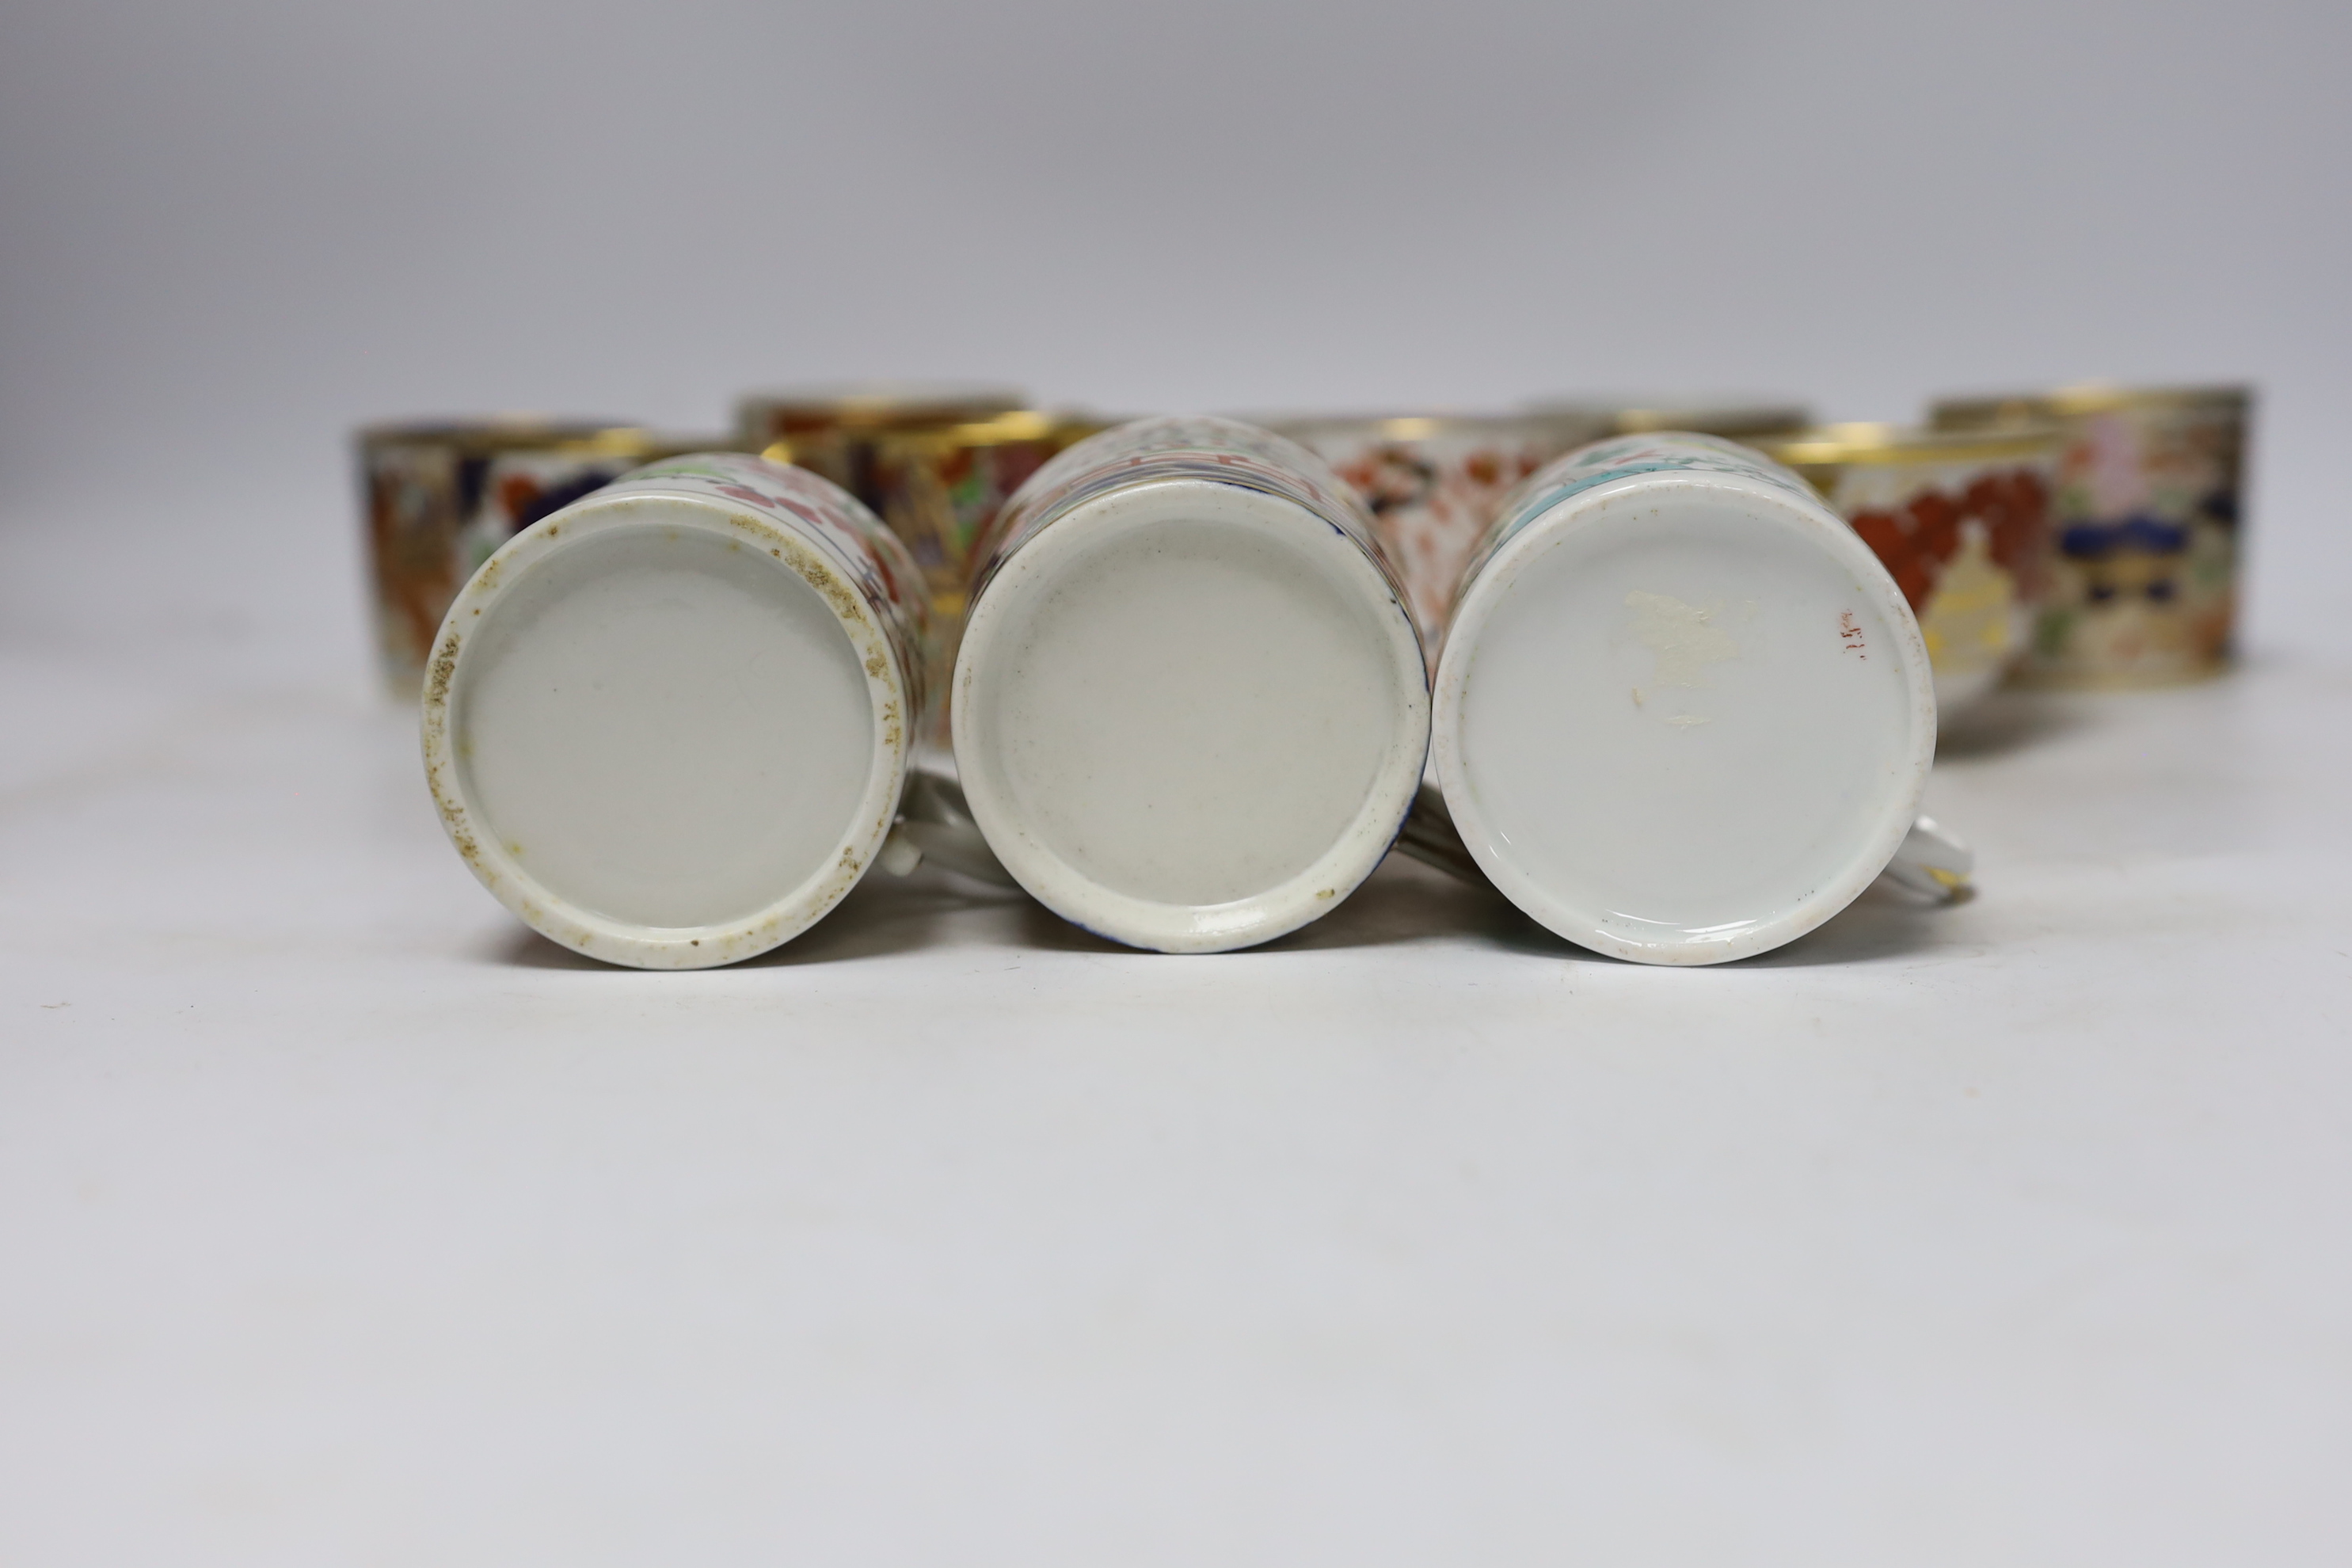 Twelve 1800-1820 English porcelain coffee cans and tea cups, including Imari pattern examples